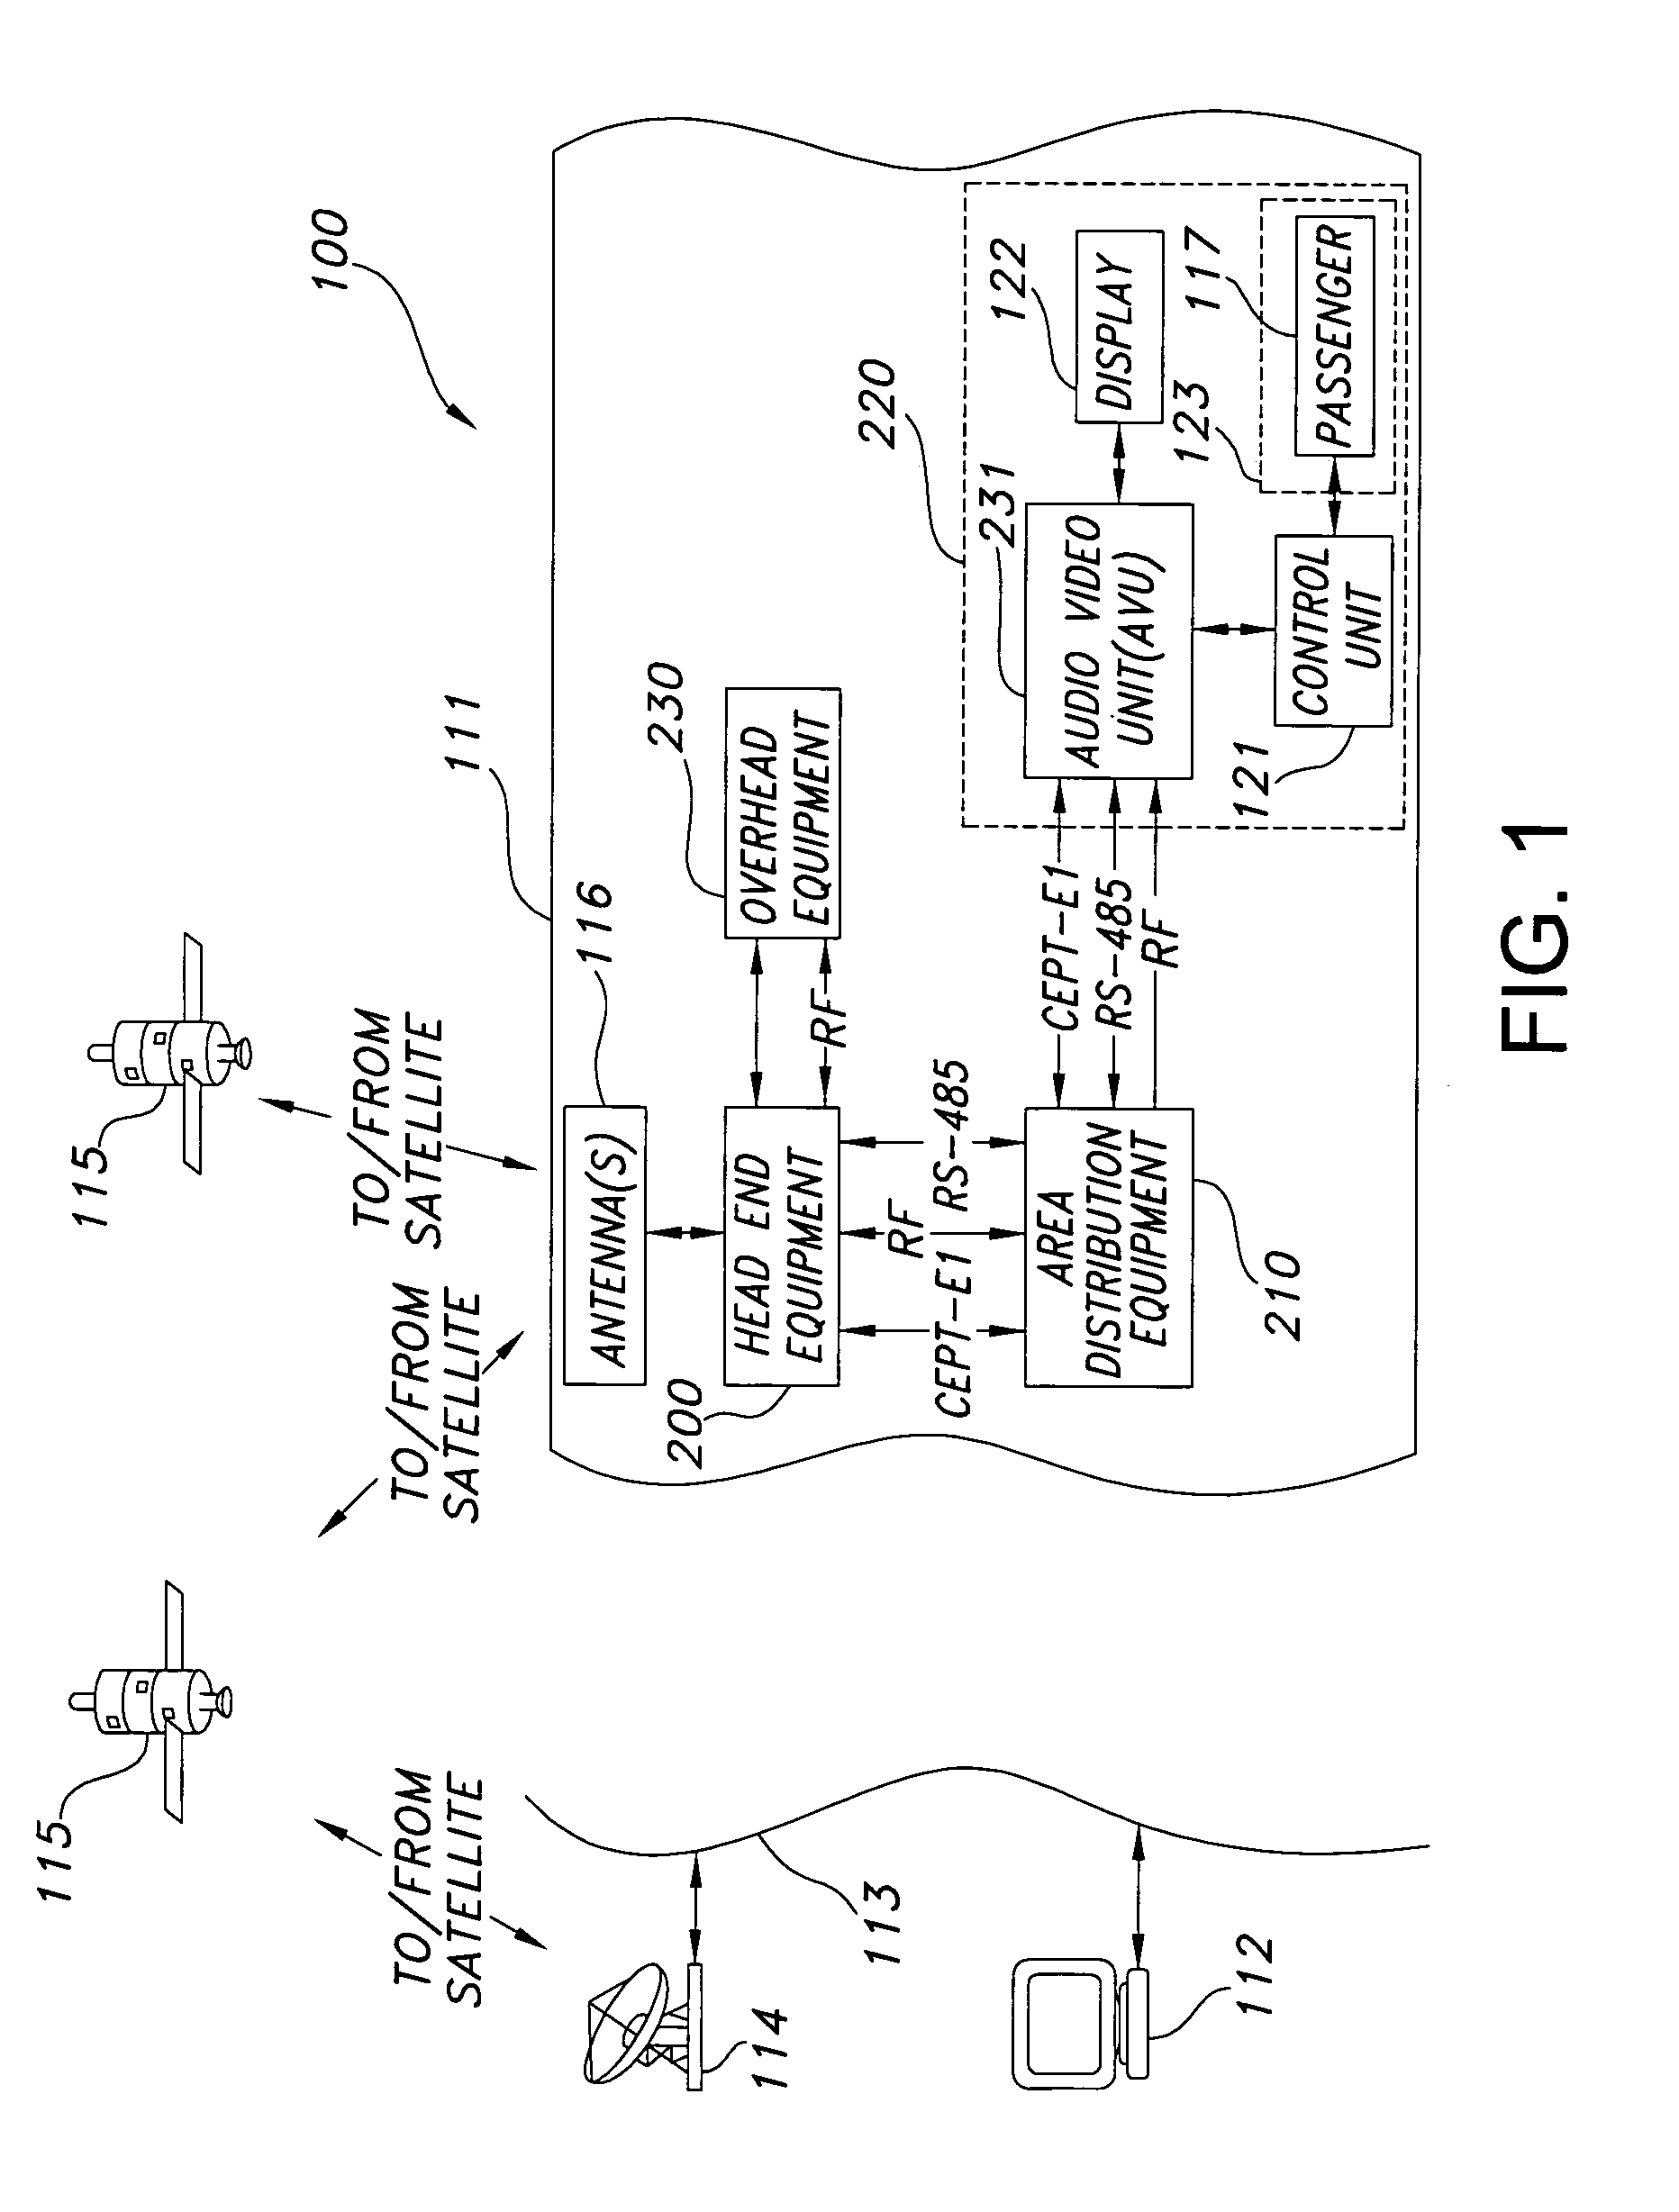 Virtual line replaceable unit for a passenger entertainment system, method and article of manufacture